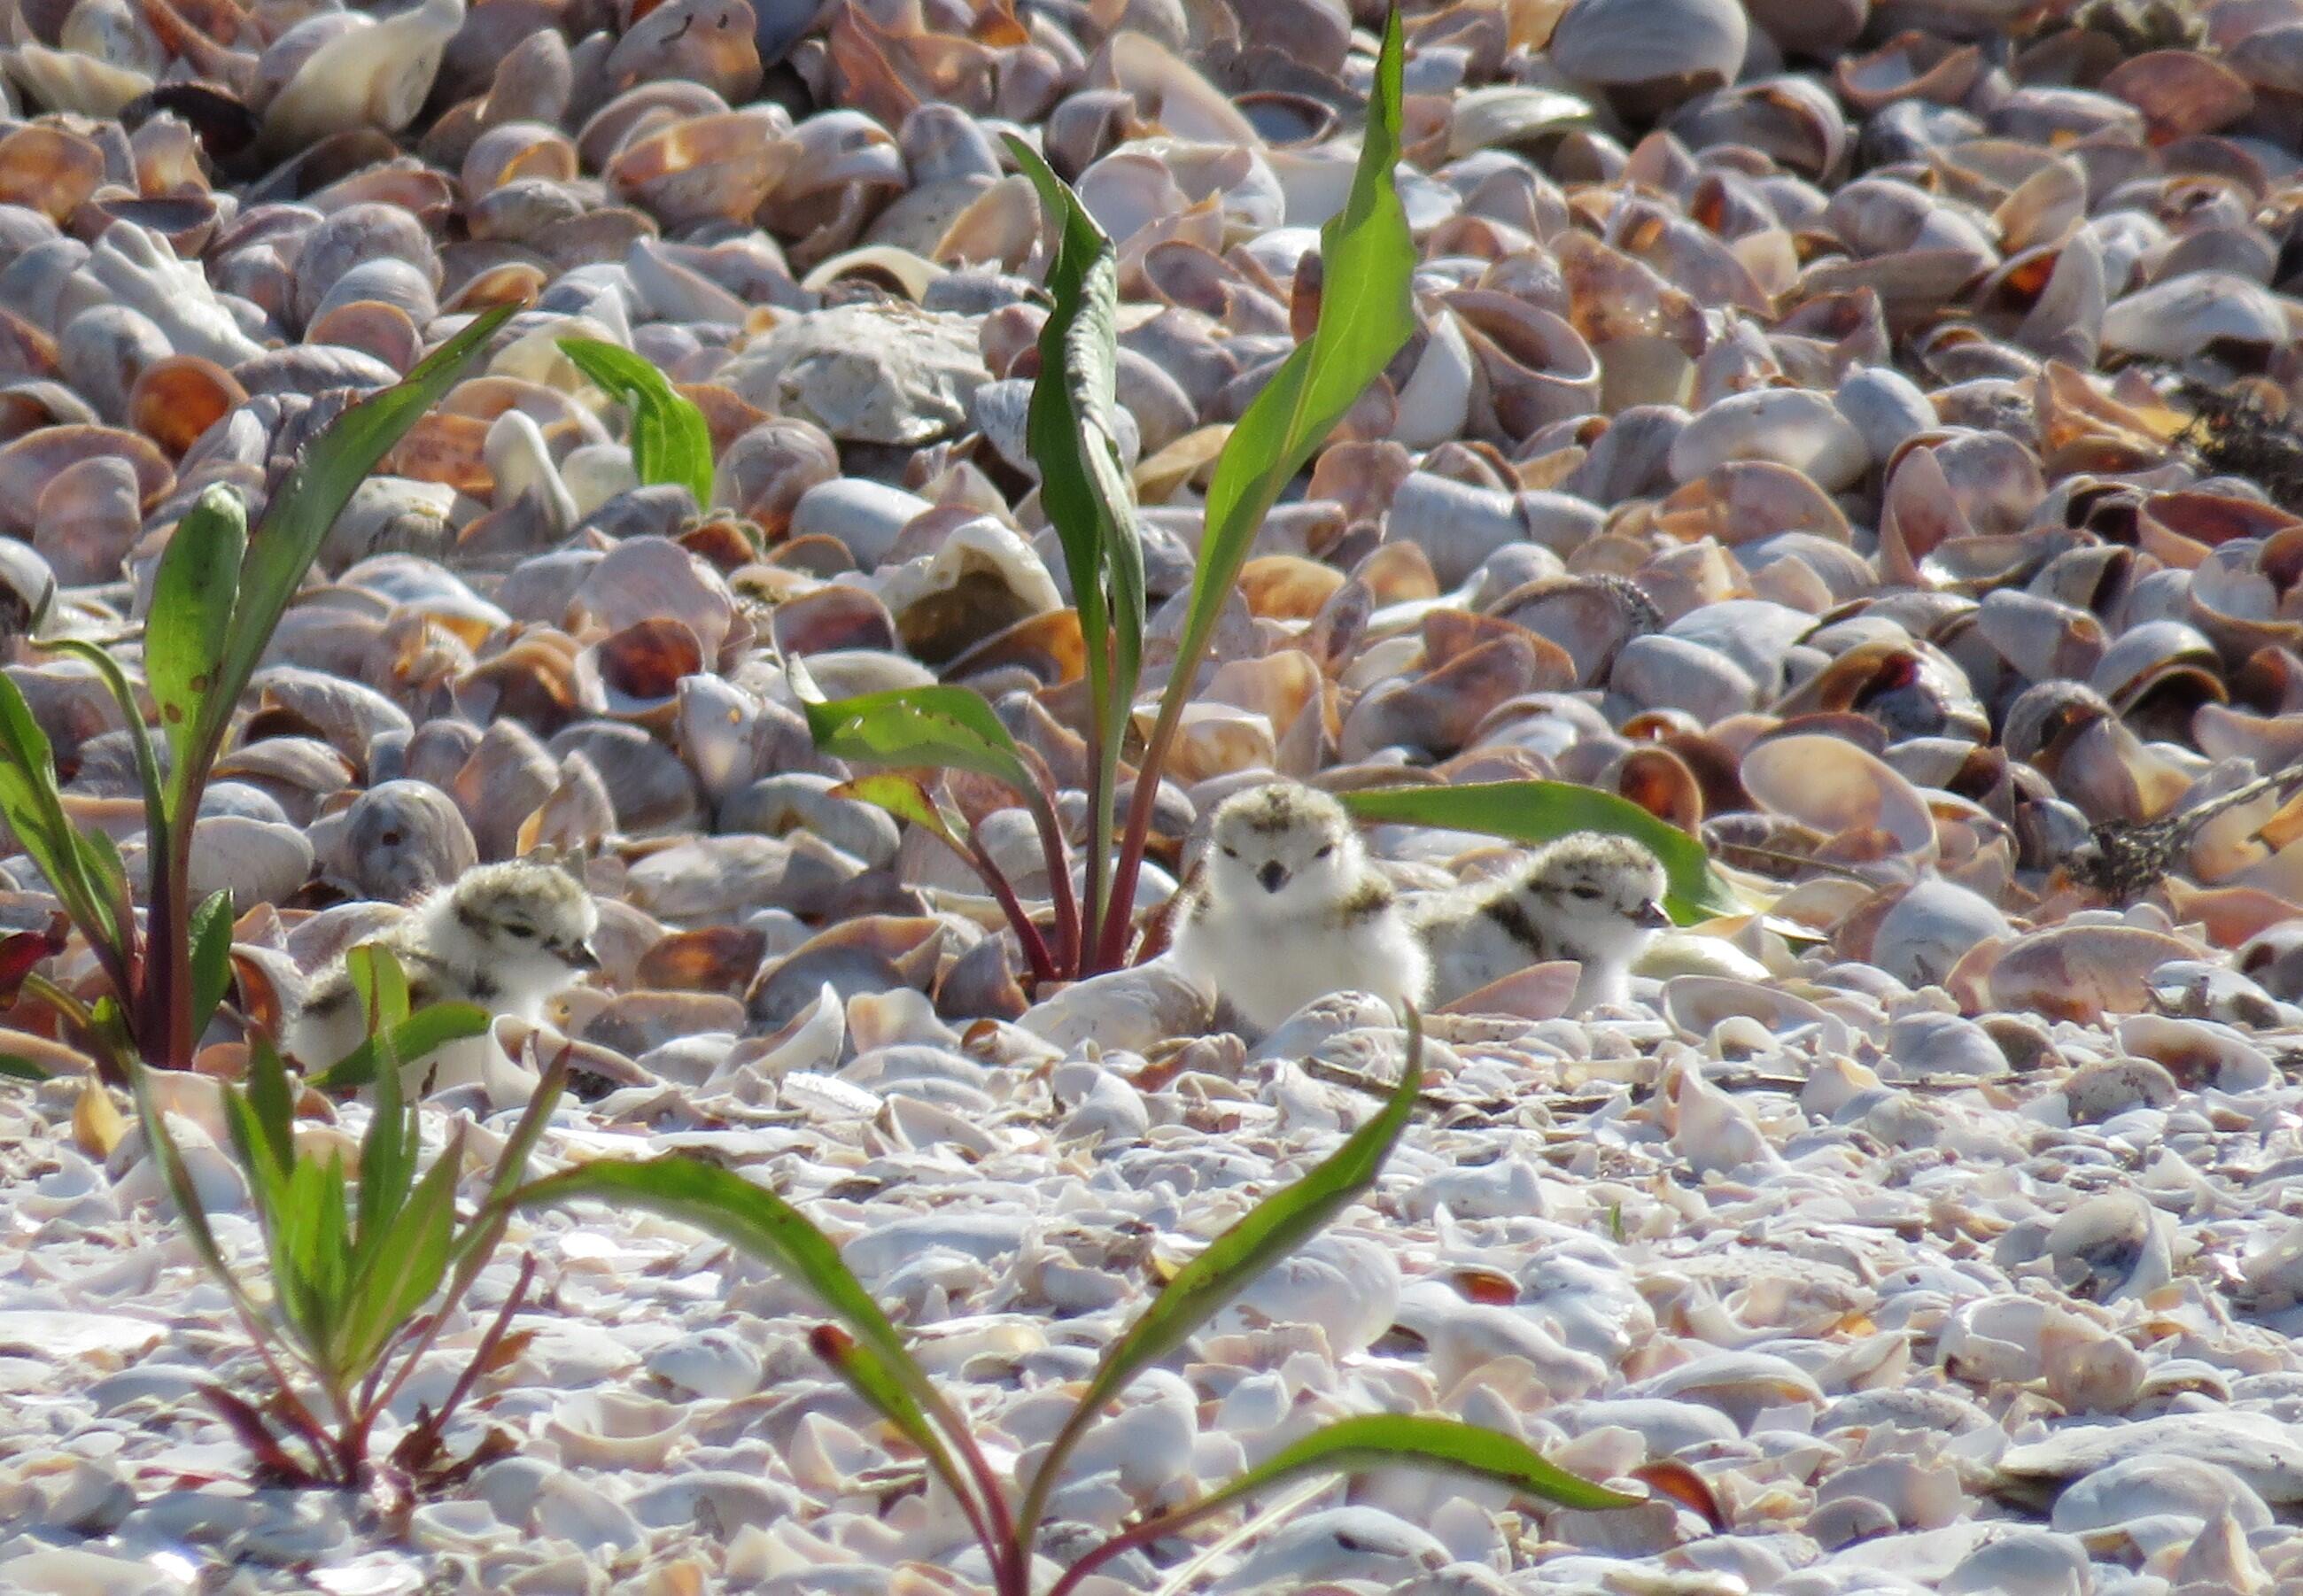 Three small white fluffy Piping Plover chicks are nearly camouflaged, sitting beneath small plants on a beach amidst seashells and rocks.